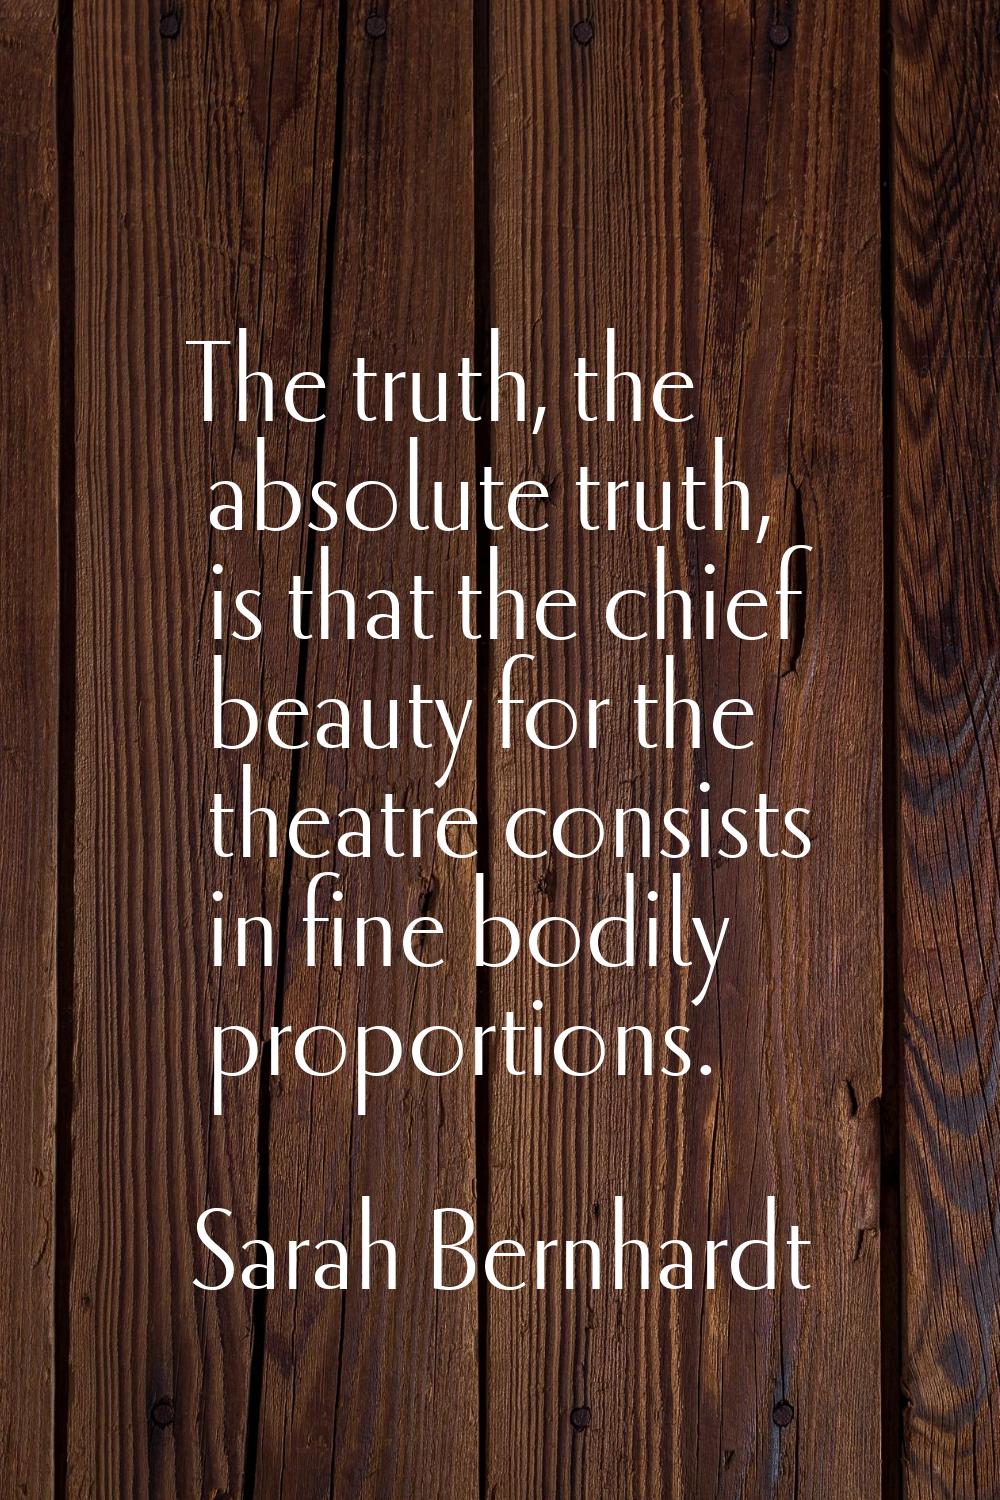 The truth, the absolute truth, is that the chief beauty for the theatre consists in fine bodily pro